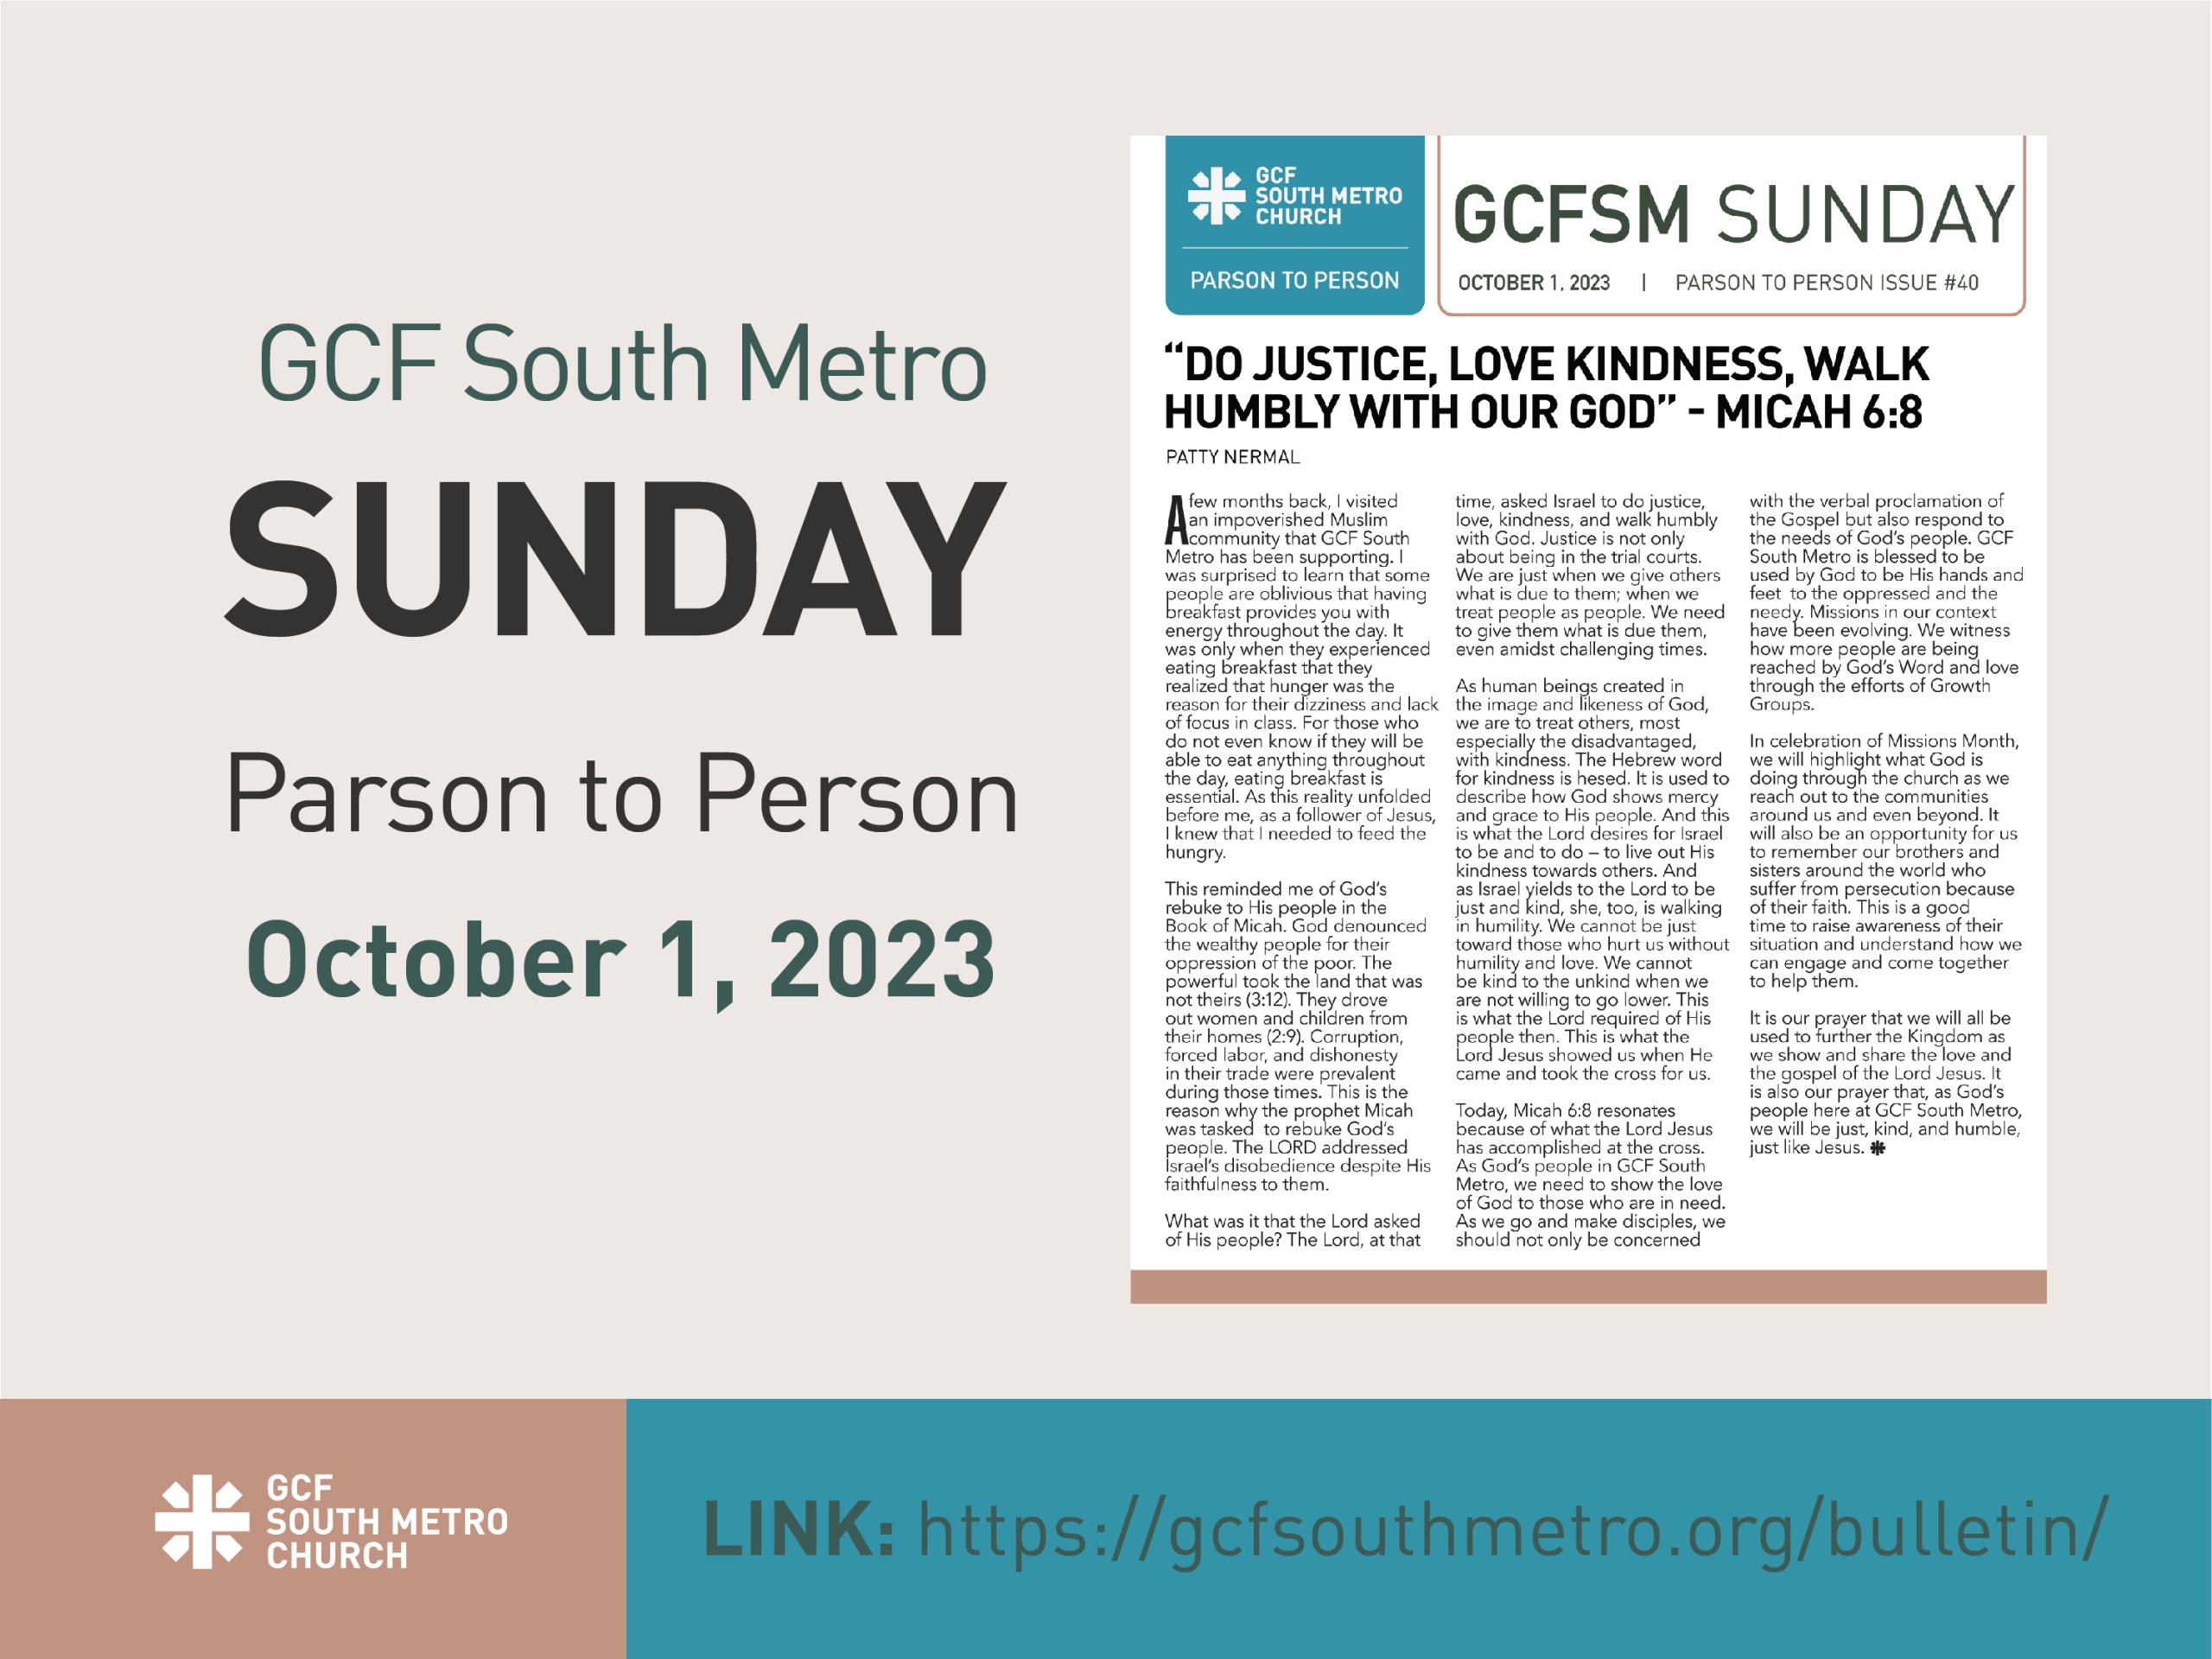 Sunday Bulletin – Parson to Person, October 1, 2023